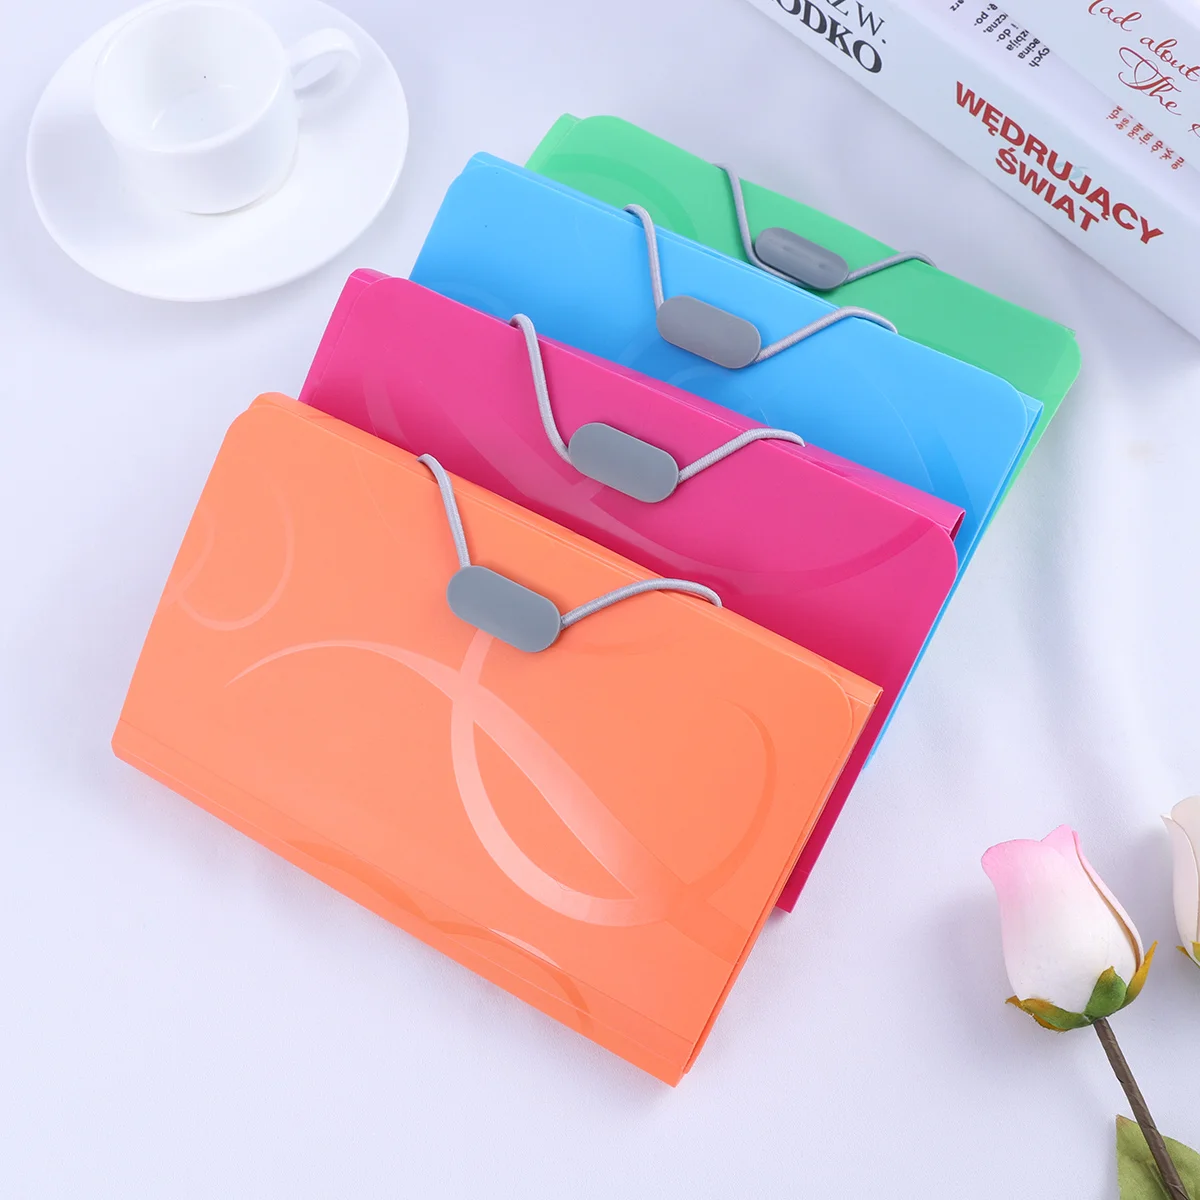 

4pcs Expanding File Folder Accordin File Organizer Portable Multilayer Document Holder for Receipts Coupon Checks Office